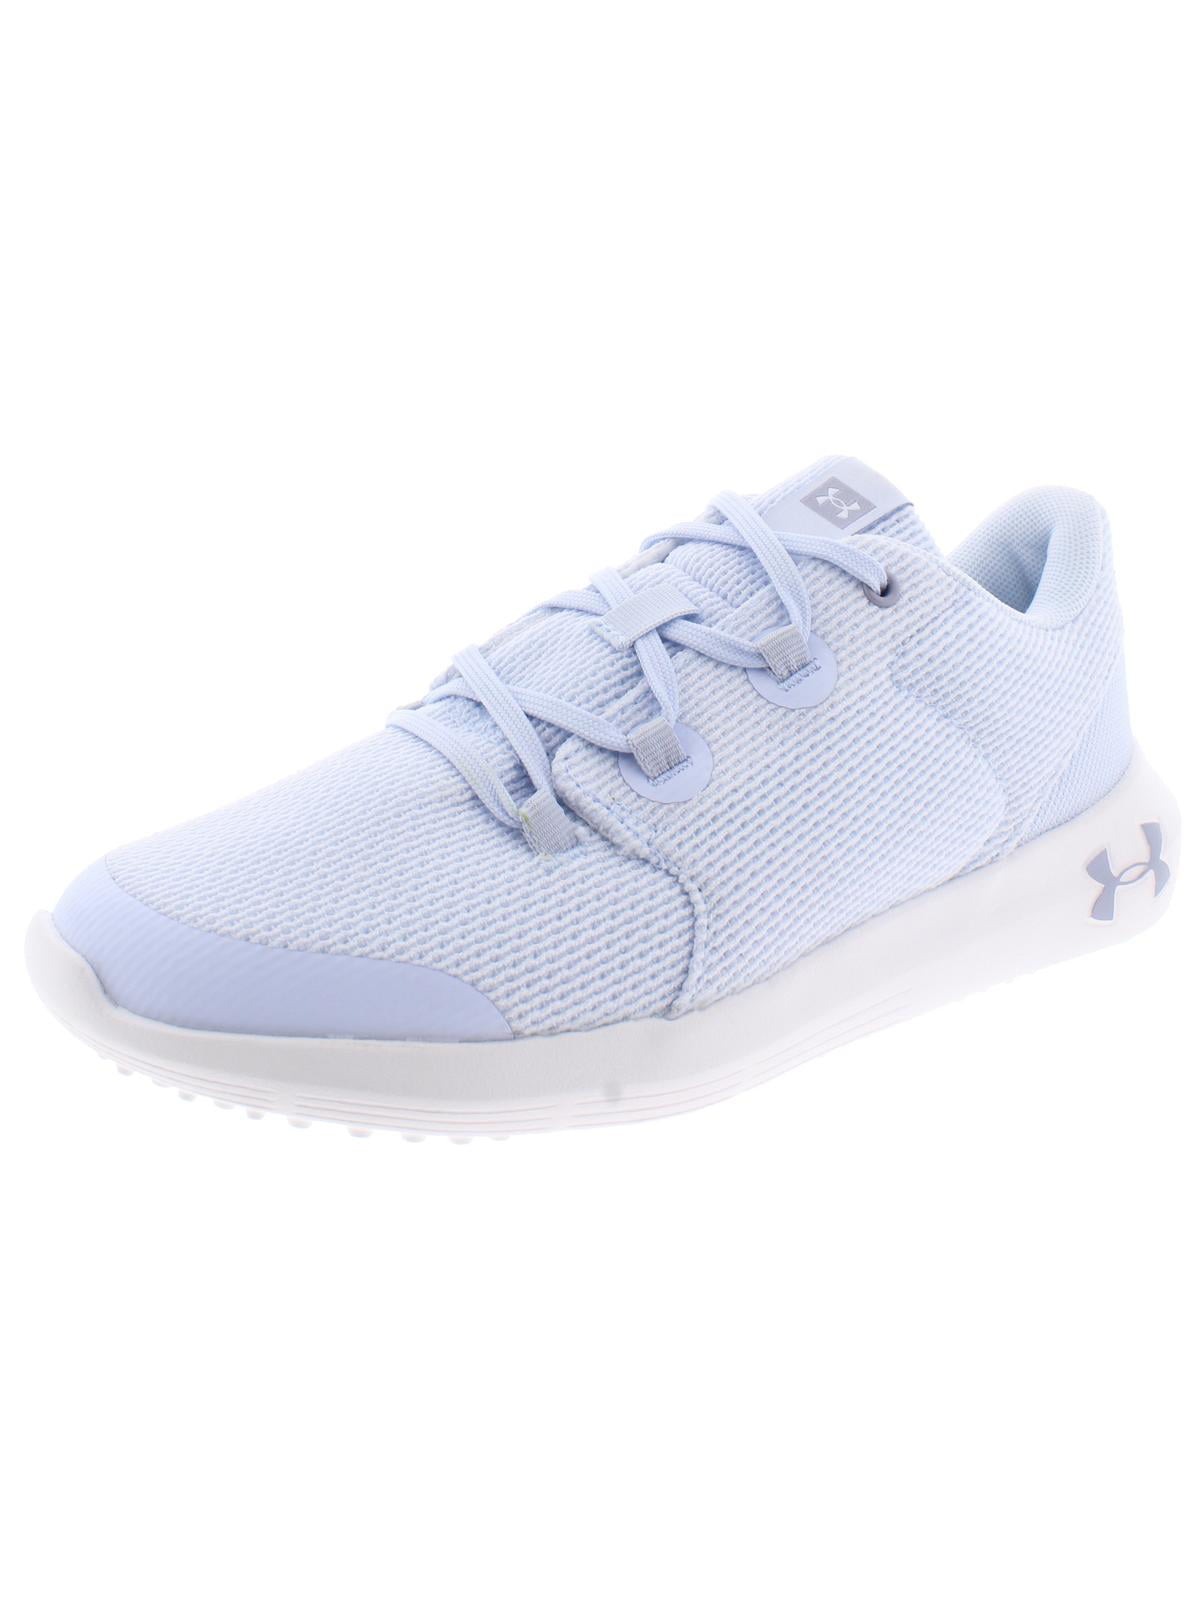 under armour girls trainers